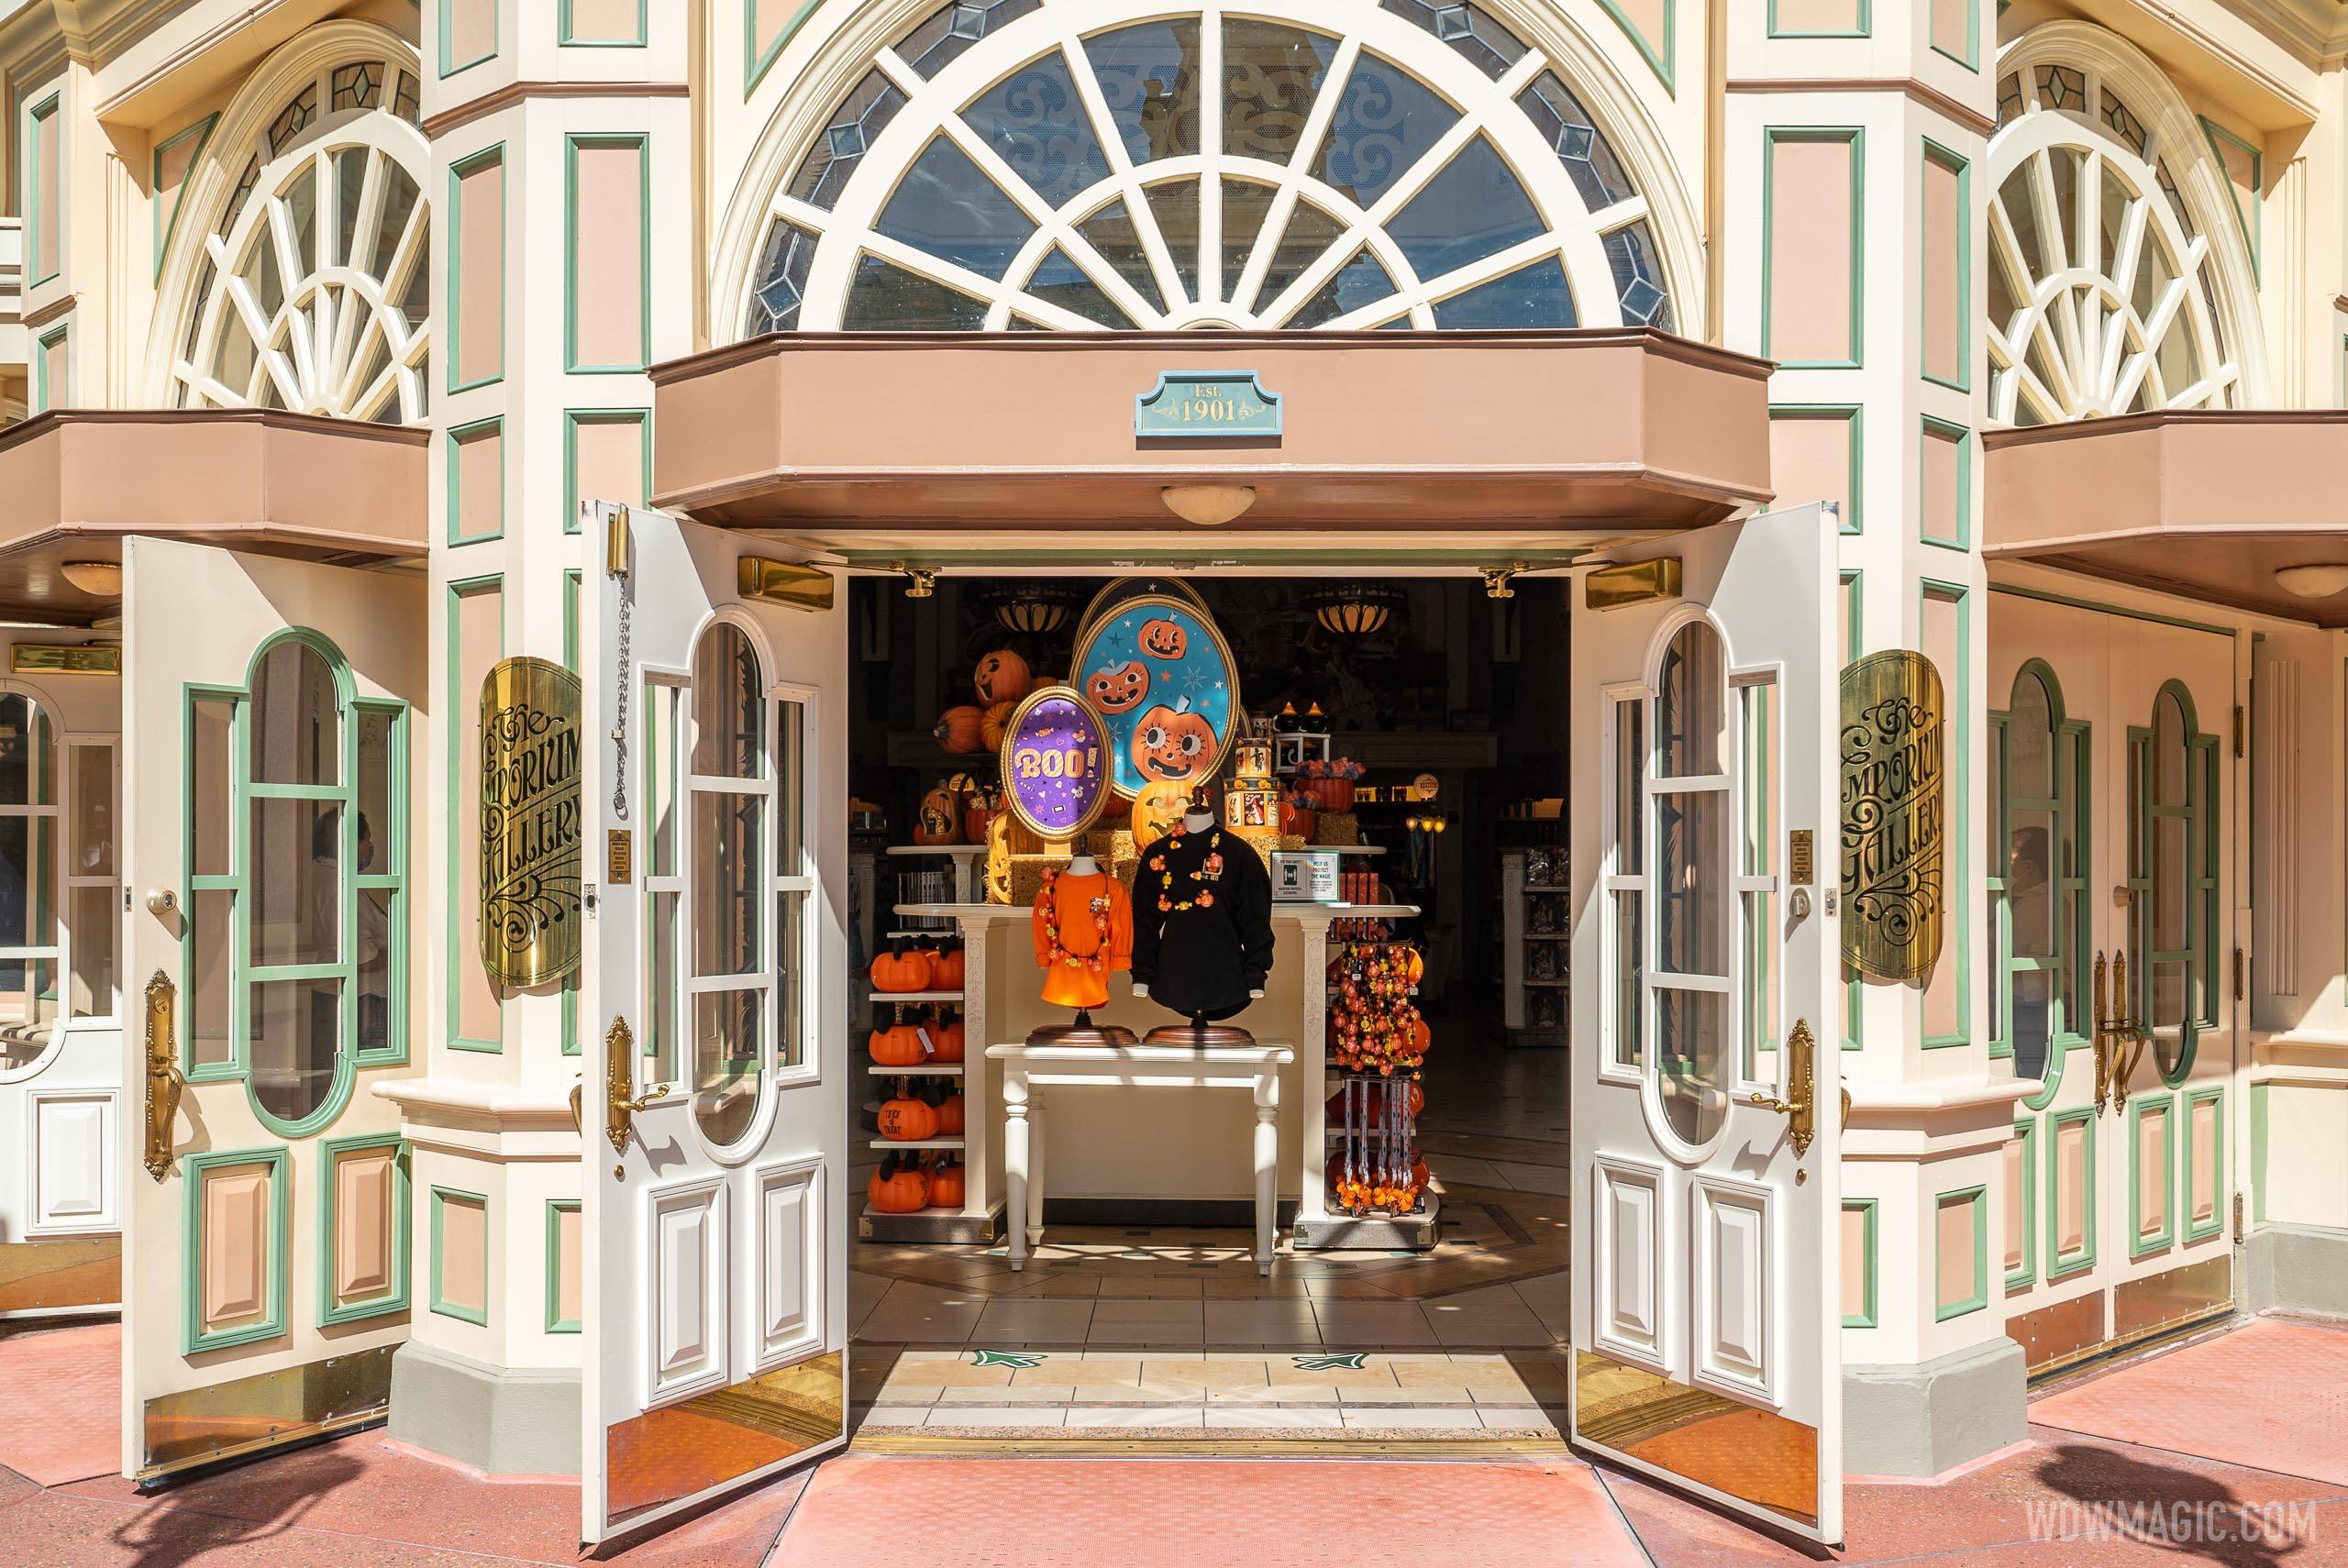 Disney is pushing new merchandise for the fall season with new discounts